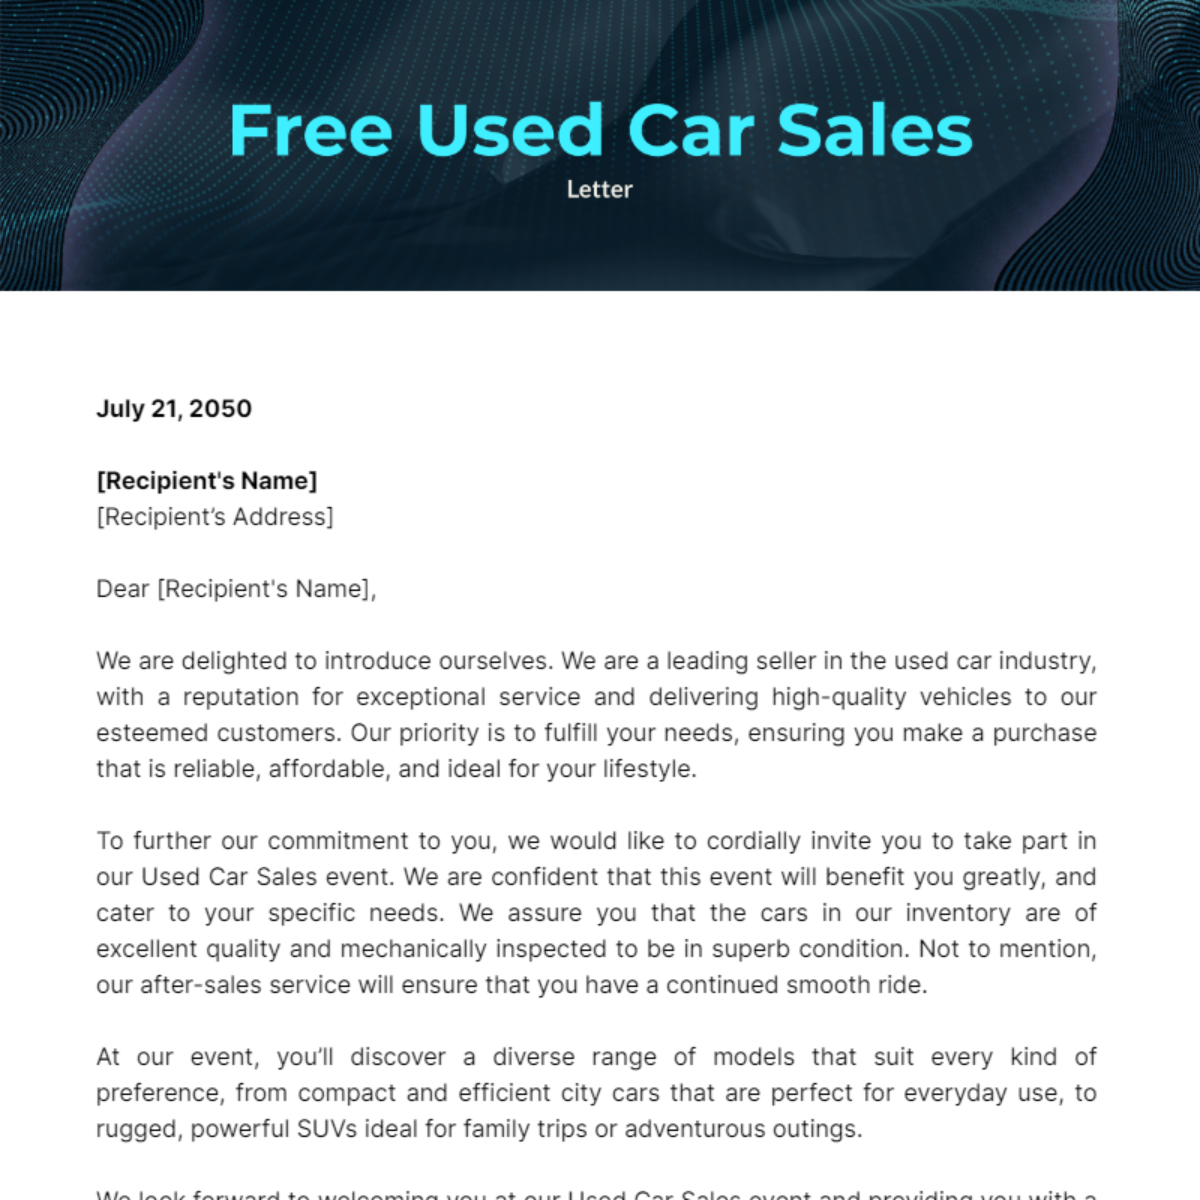 Used Car Sales Letter Template